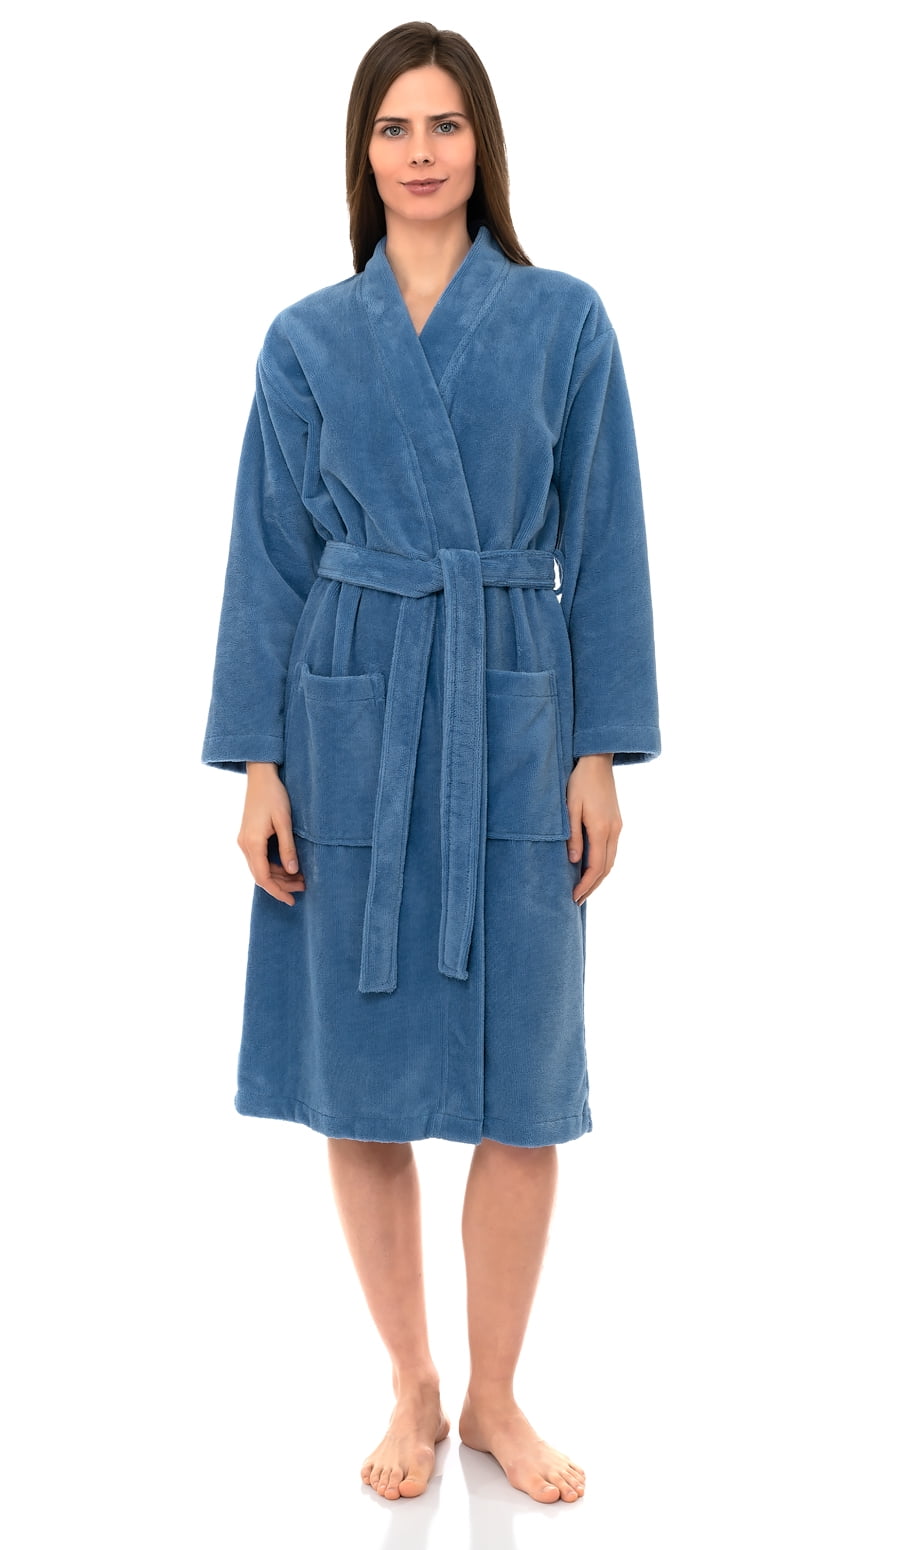 TowelSelections Women's Hooded Robe Cotton Lined Soft Terry Bathrobe 